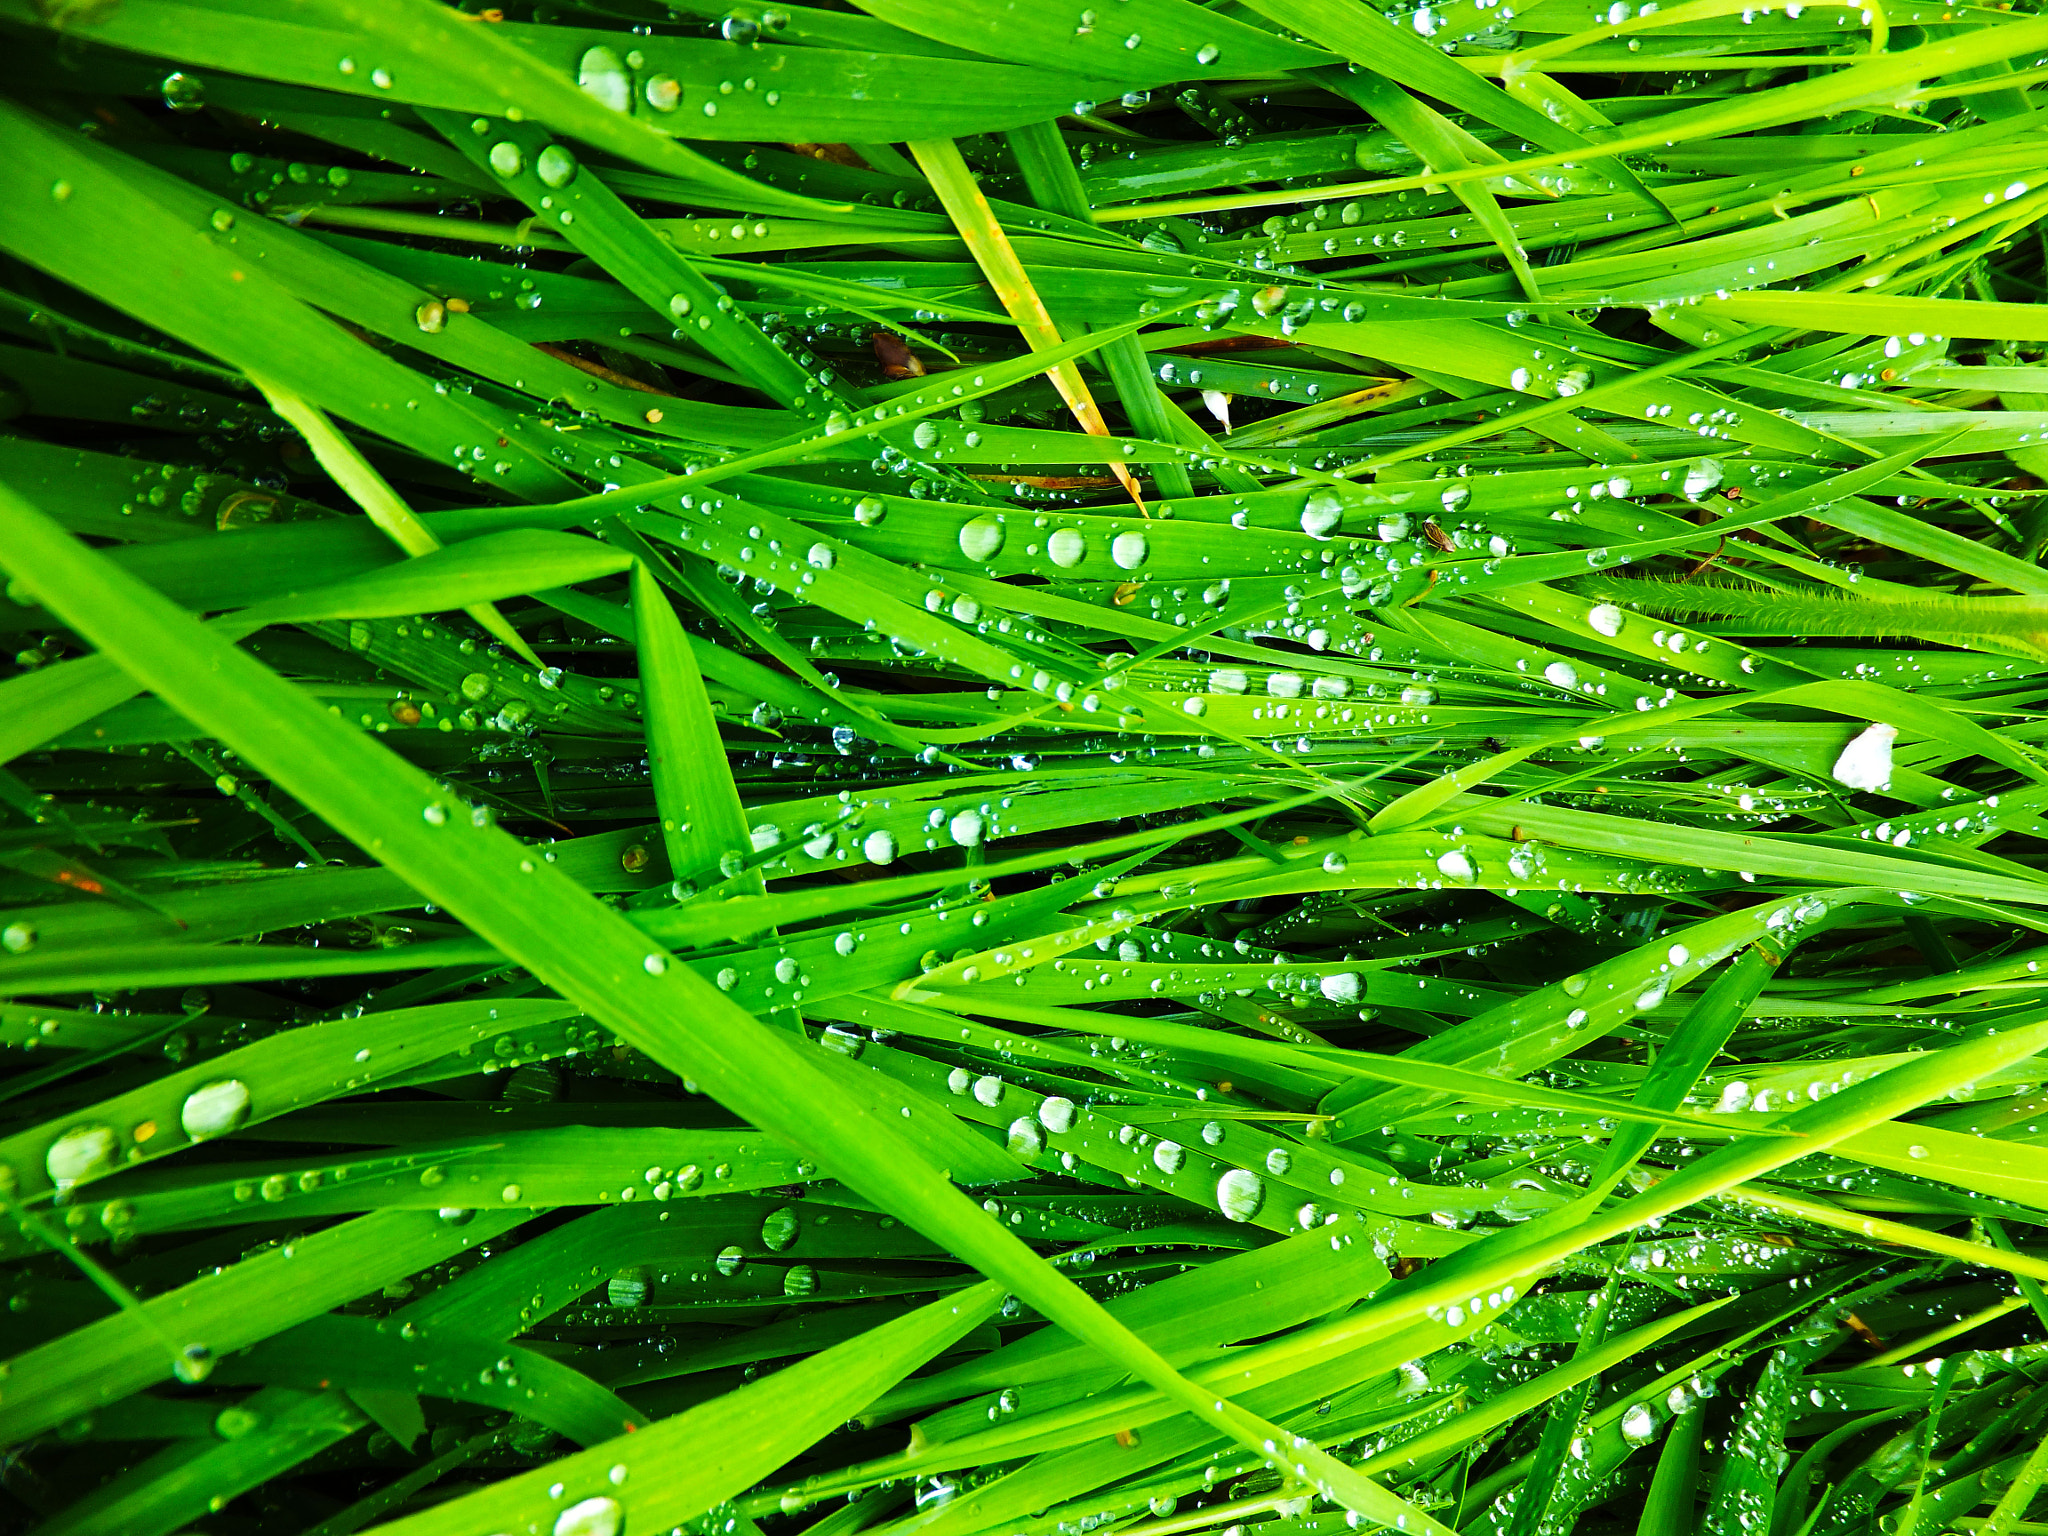 Fujifilm FinePix F600 EXR sample photo. Water droplets on grass photography